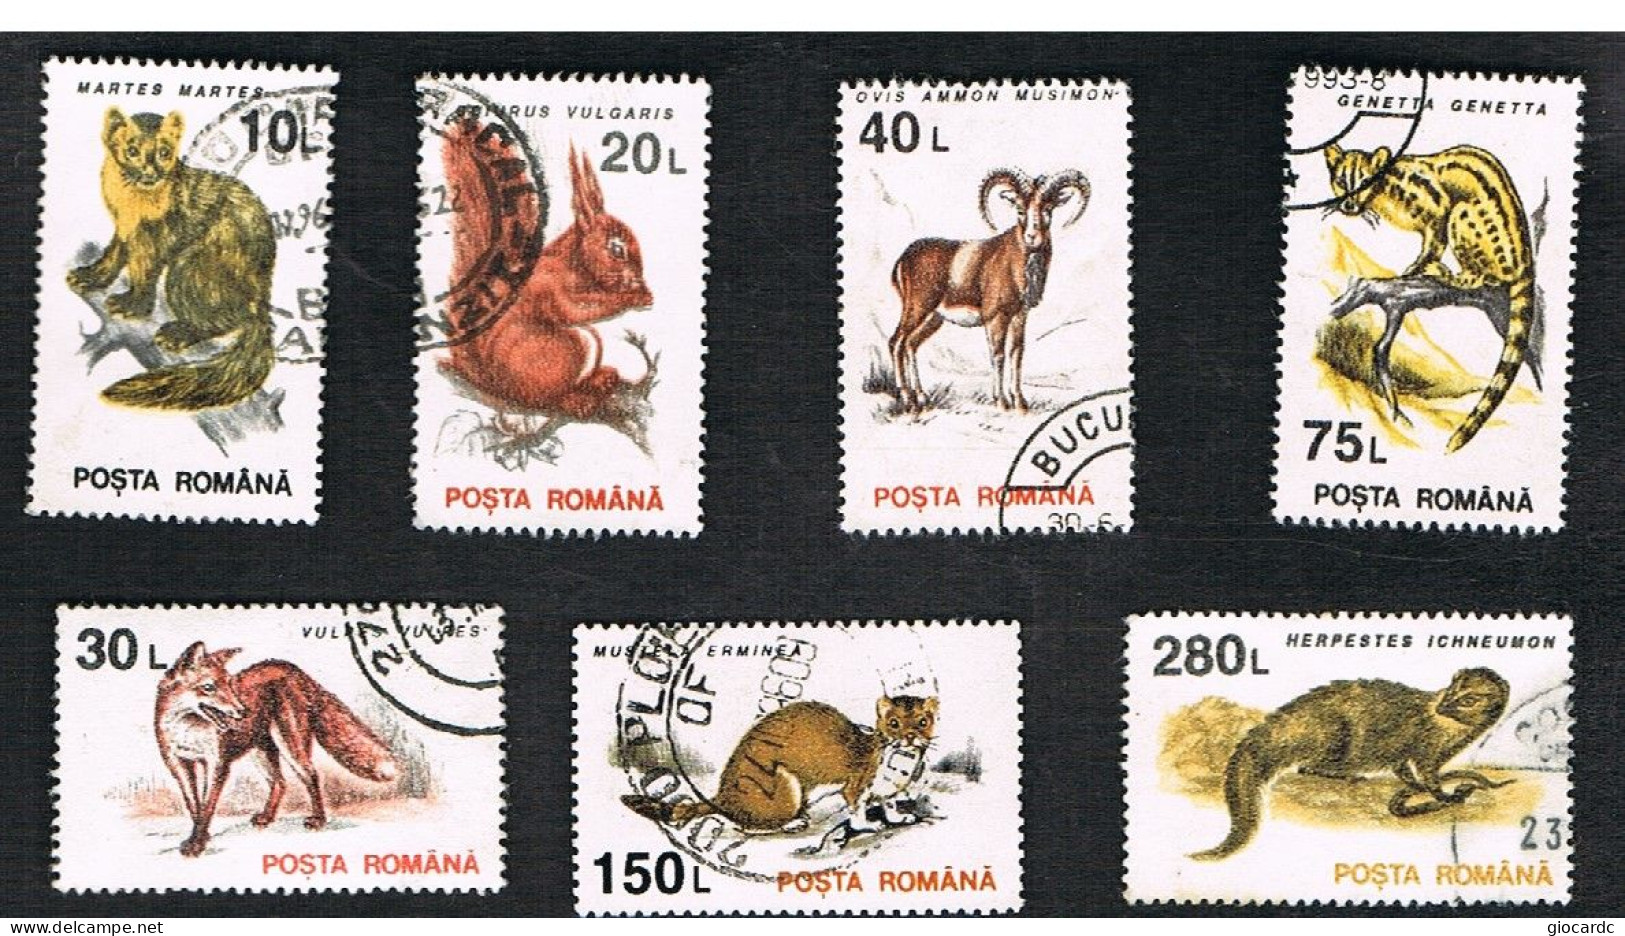 ROMANIA - SG 5533.5542  - 1995  CURRENT SERIE: ANIMALS   (7 STAMPS OF THE SET  ON WHITE PAPER)  - USED ° - Gebraucht